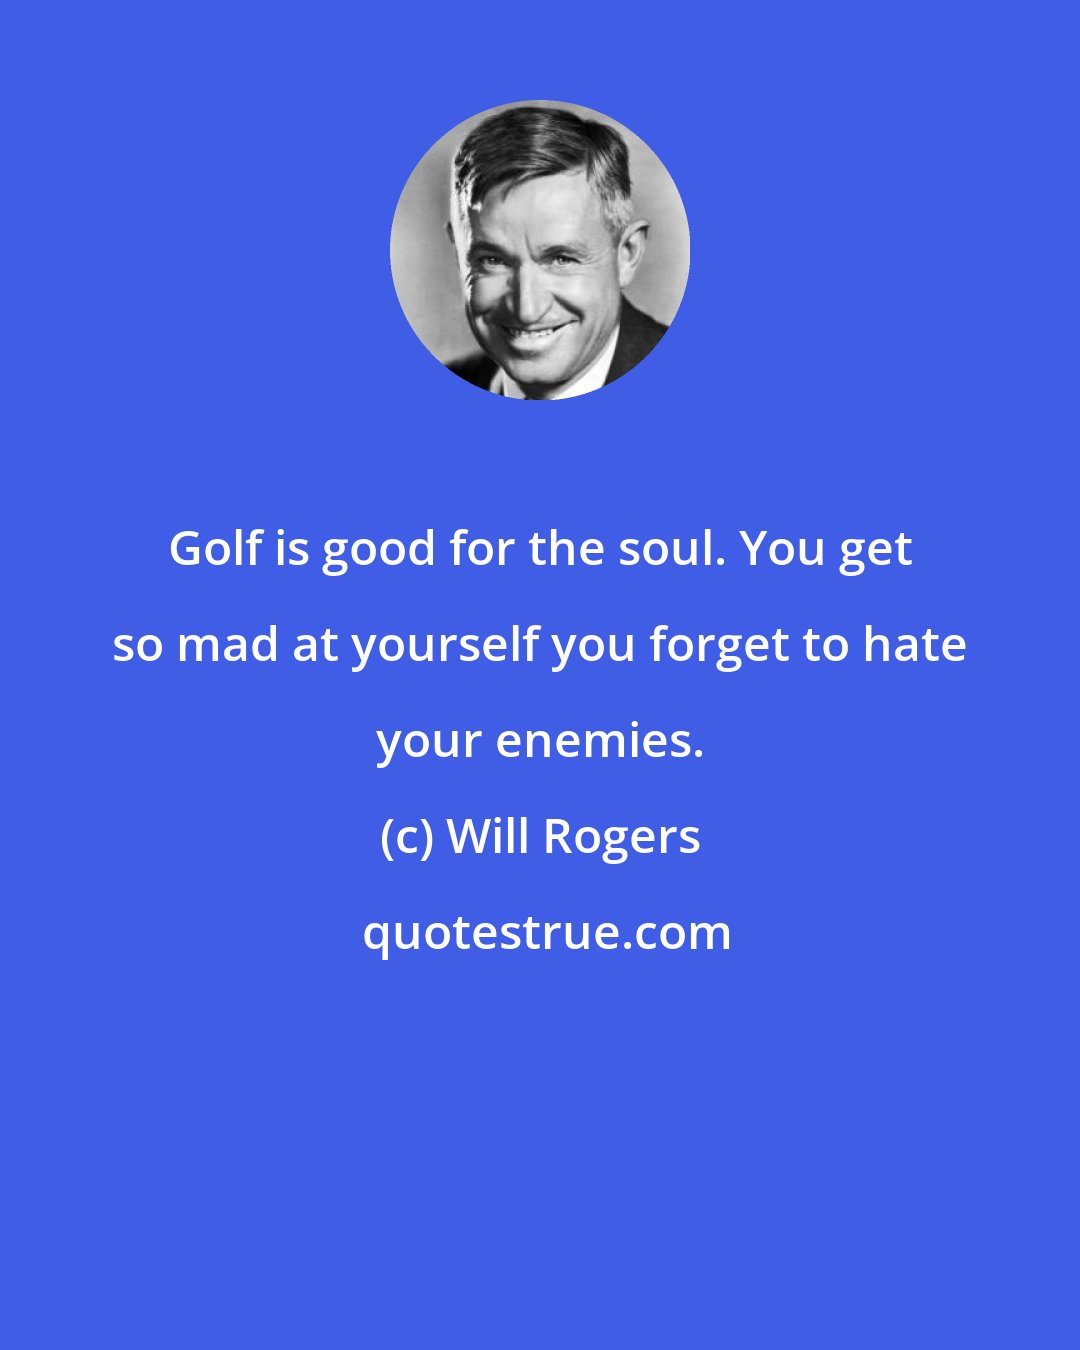 Will Rogers: Golf is good for the soul. You get so mad at yourself you forget to hate your enemies.